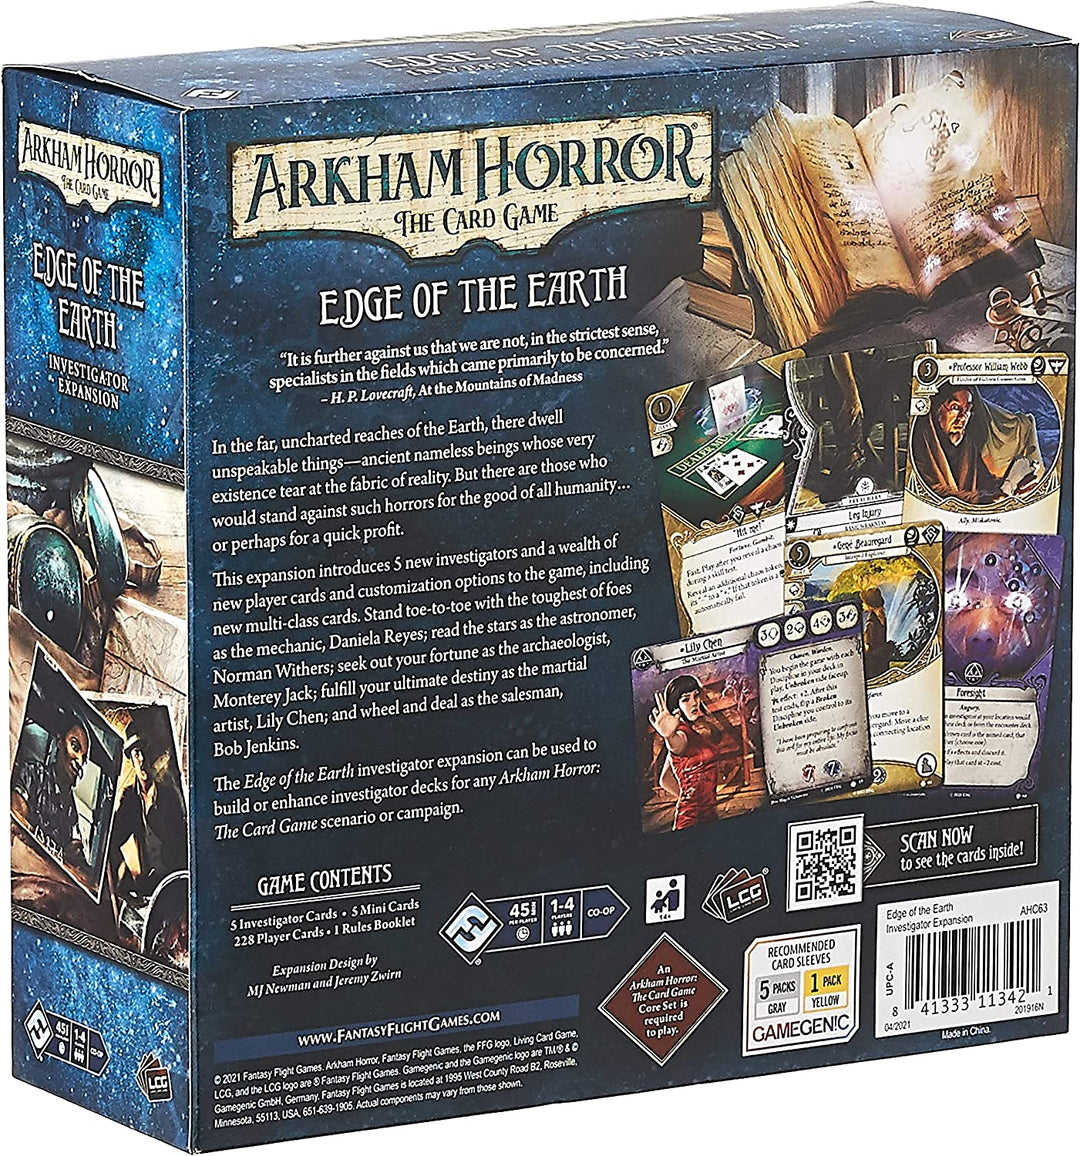 Arkham Horror The Card Game: Edge of the Earth Investigators Expansion